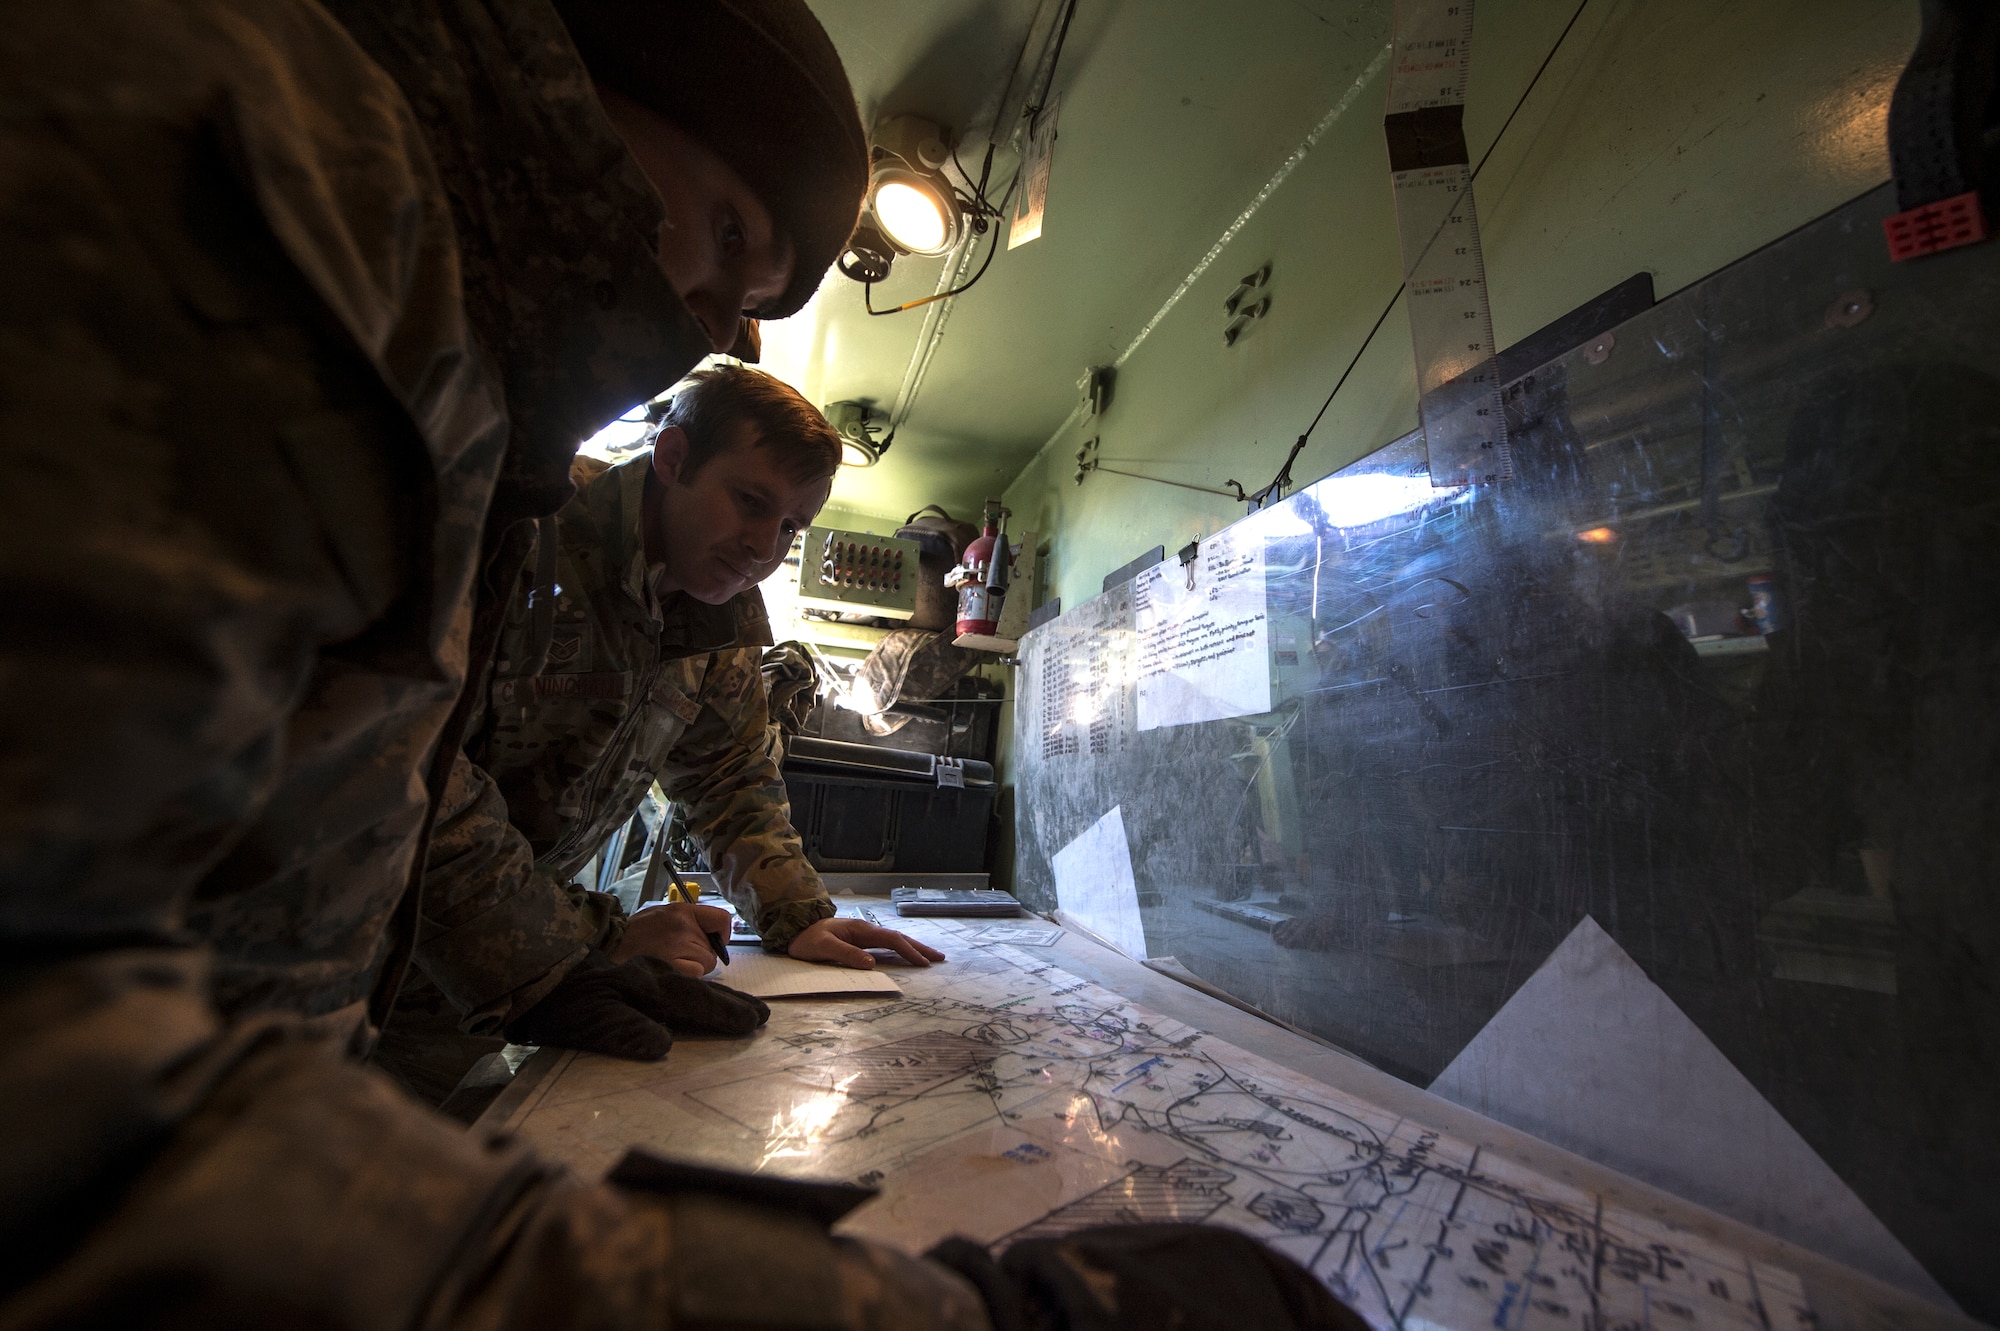 U.S. Army Capt. David Burkhardt, 3rd Brigade Combat Team, 1st Armored Division battalion fire support officer, left, and U.S. Air Force Staff Sgt. Lonny Cunningham, 7th Air Support Operations Squadron joint terminal attack controller, plan for operations during the joint exercise, Iron Focus, Feb. 3, 2016, at Oro Grande Training Complex at Fort Bliss, Texas. The exercise included various Air Force assets such as aircraft and weapons systems to assist Army counterparts in their ground maneuvers. (U.S. Air Force photo by Senior Airman Olivia Dominique/Released)